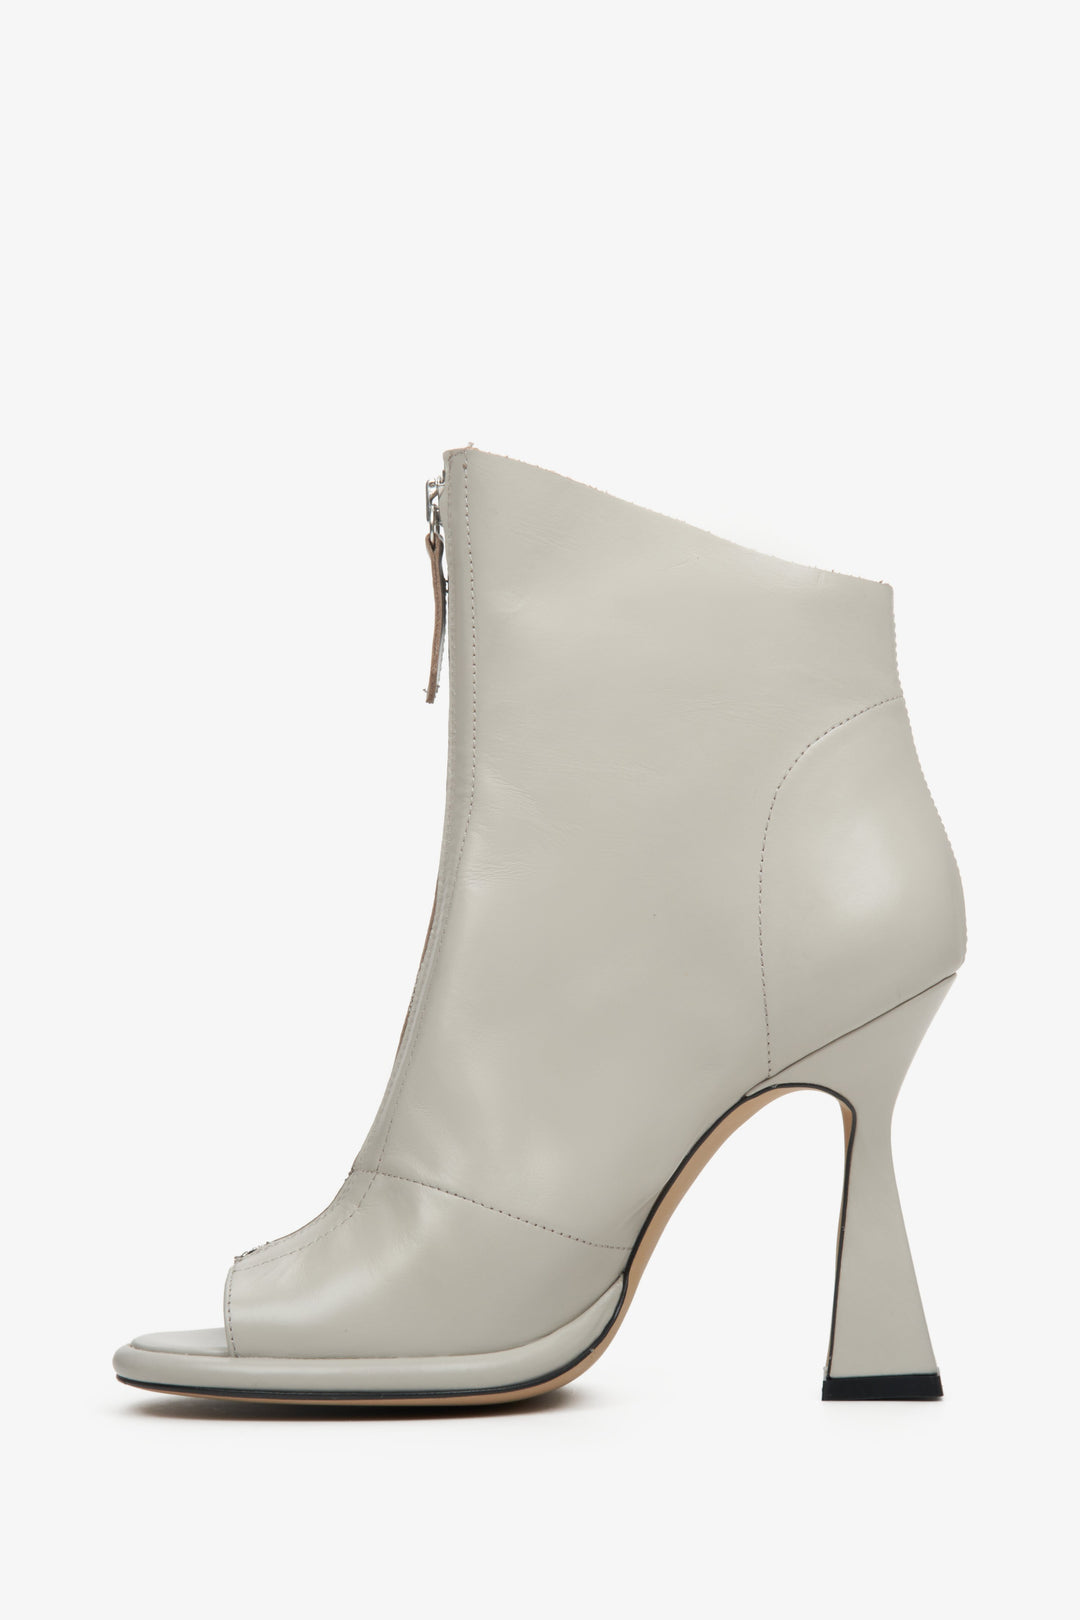 Grey women's open toe ankle boots with a funnel heel made of natural leather Estro.